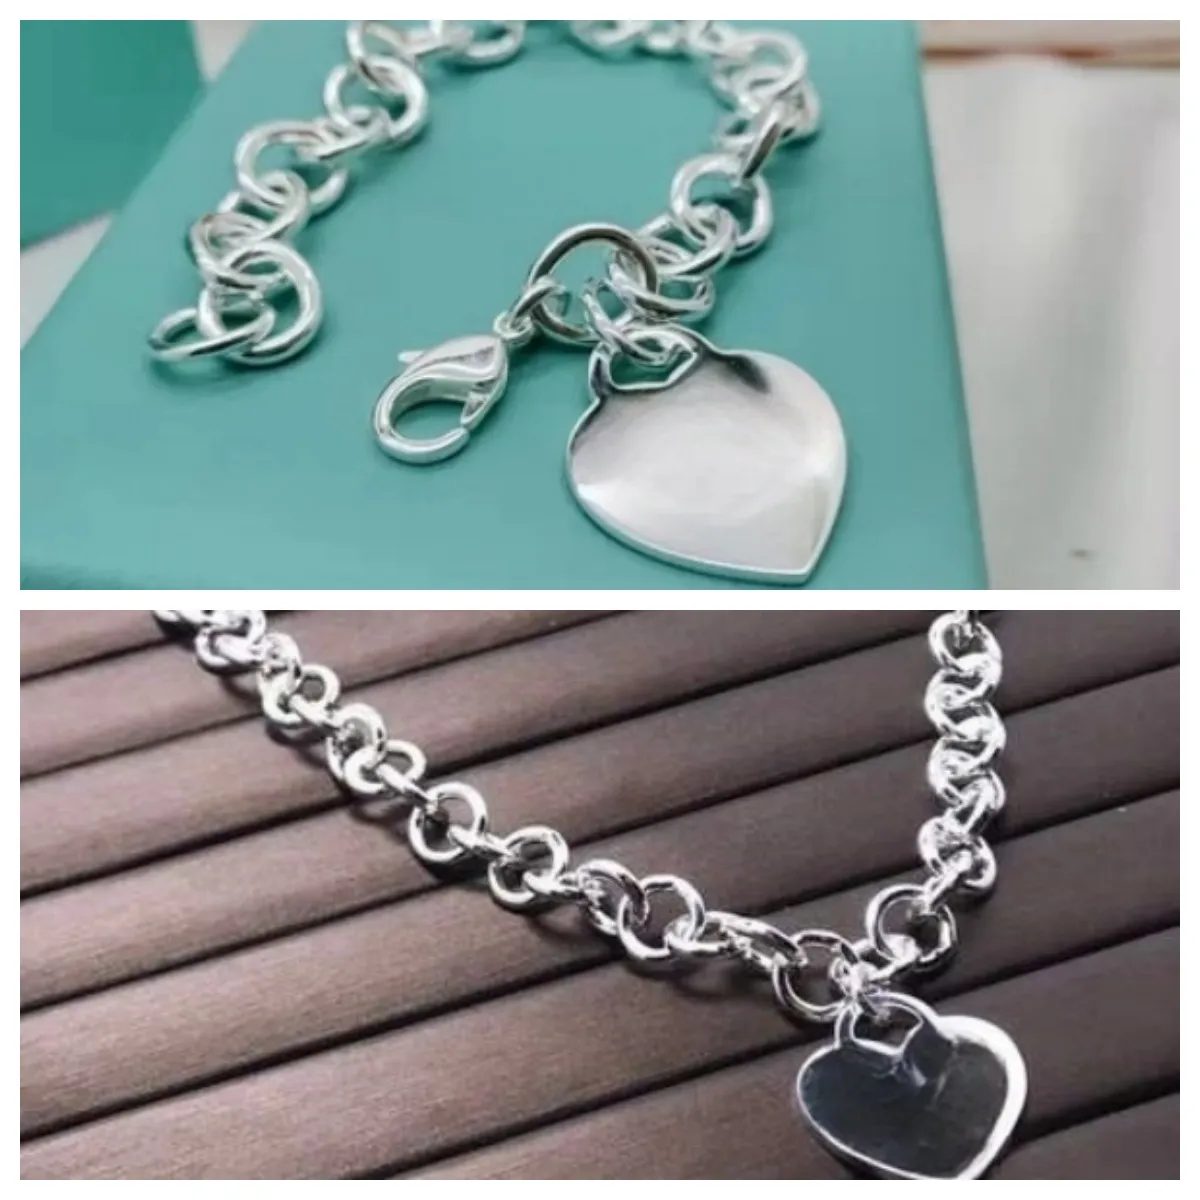 Fashion Heart Shape Pendant Necklace Bracelet Earrings Jewelry with Package Box Gift